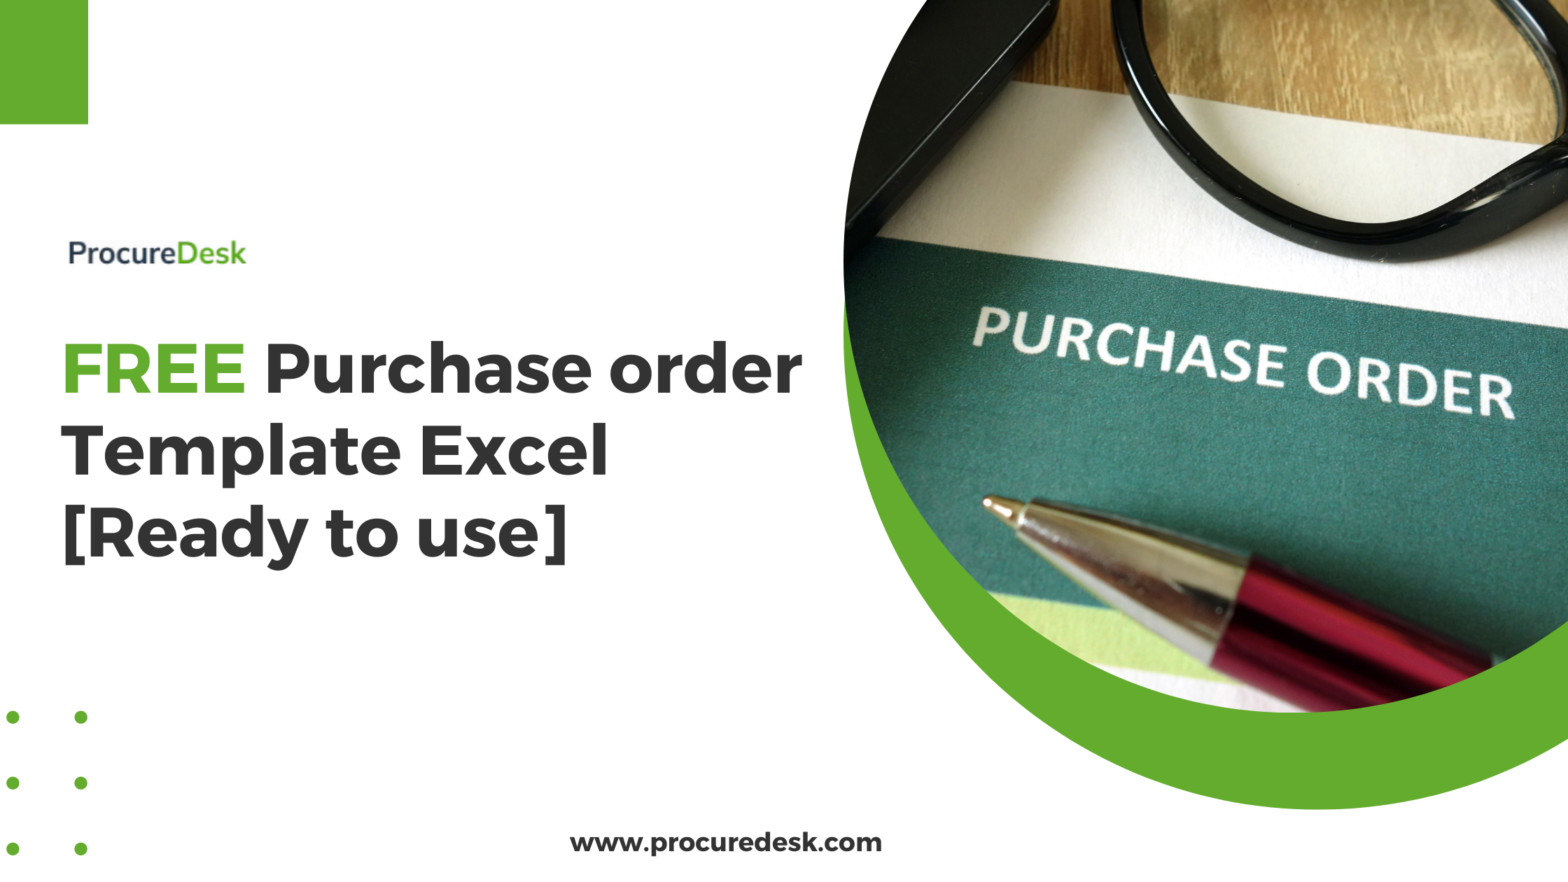 Free Purchase order Template Excel - [Ready to use]